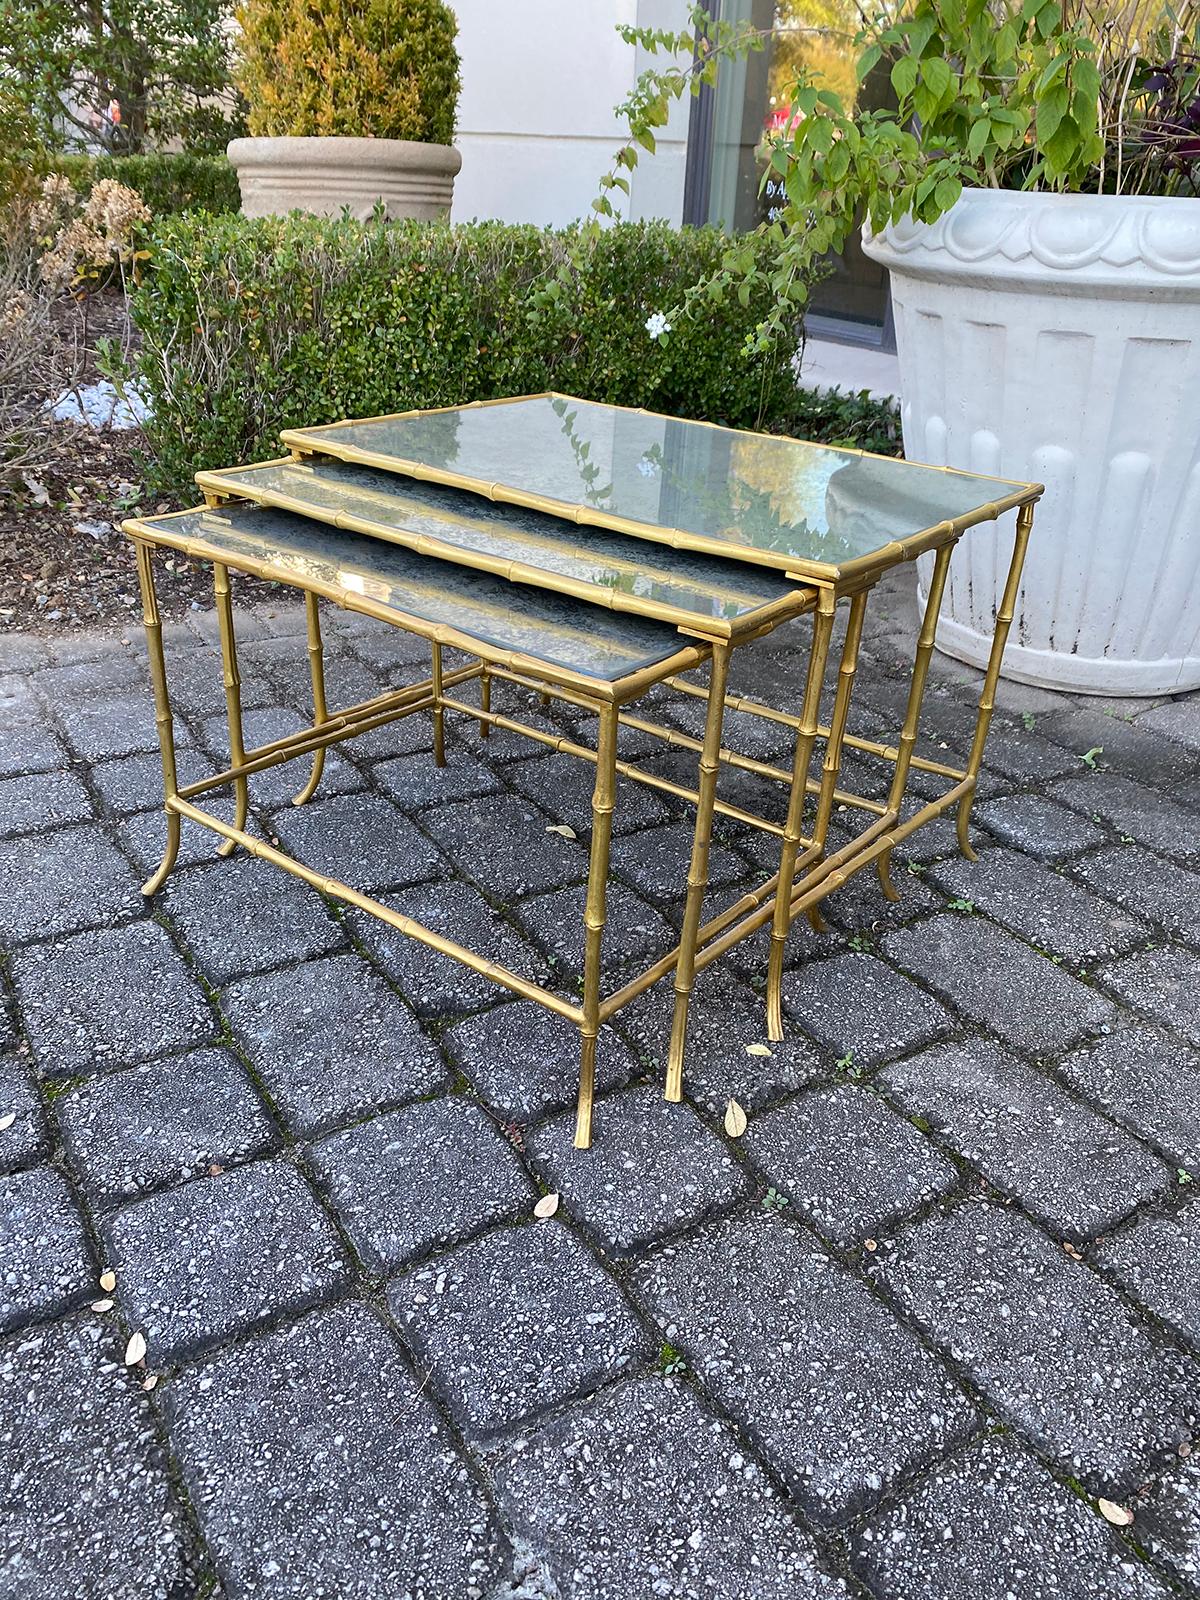 Set of three 20th century Maison Baguès style bronze faux bamboo nesting tables with aged mirror tops
Smallest measures 20.75